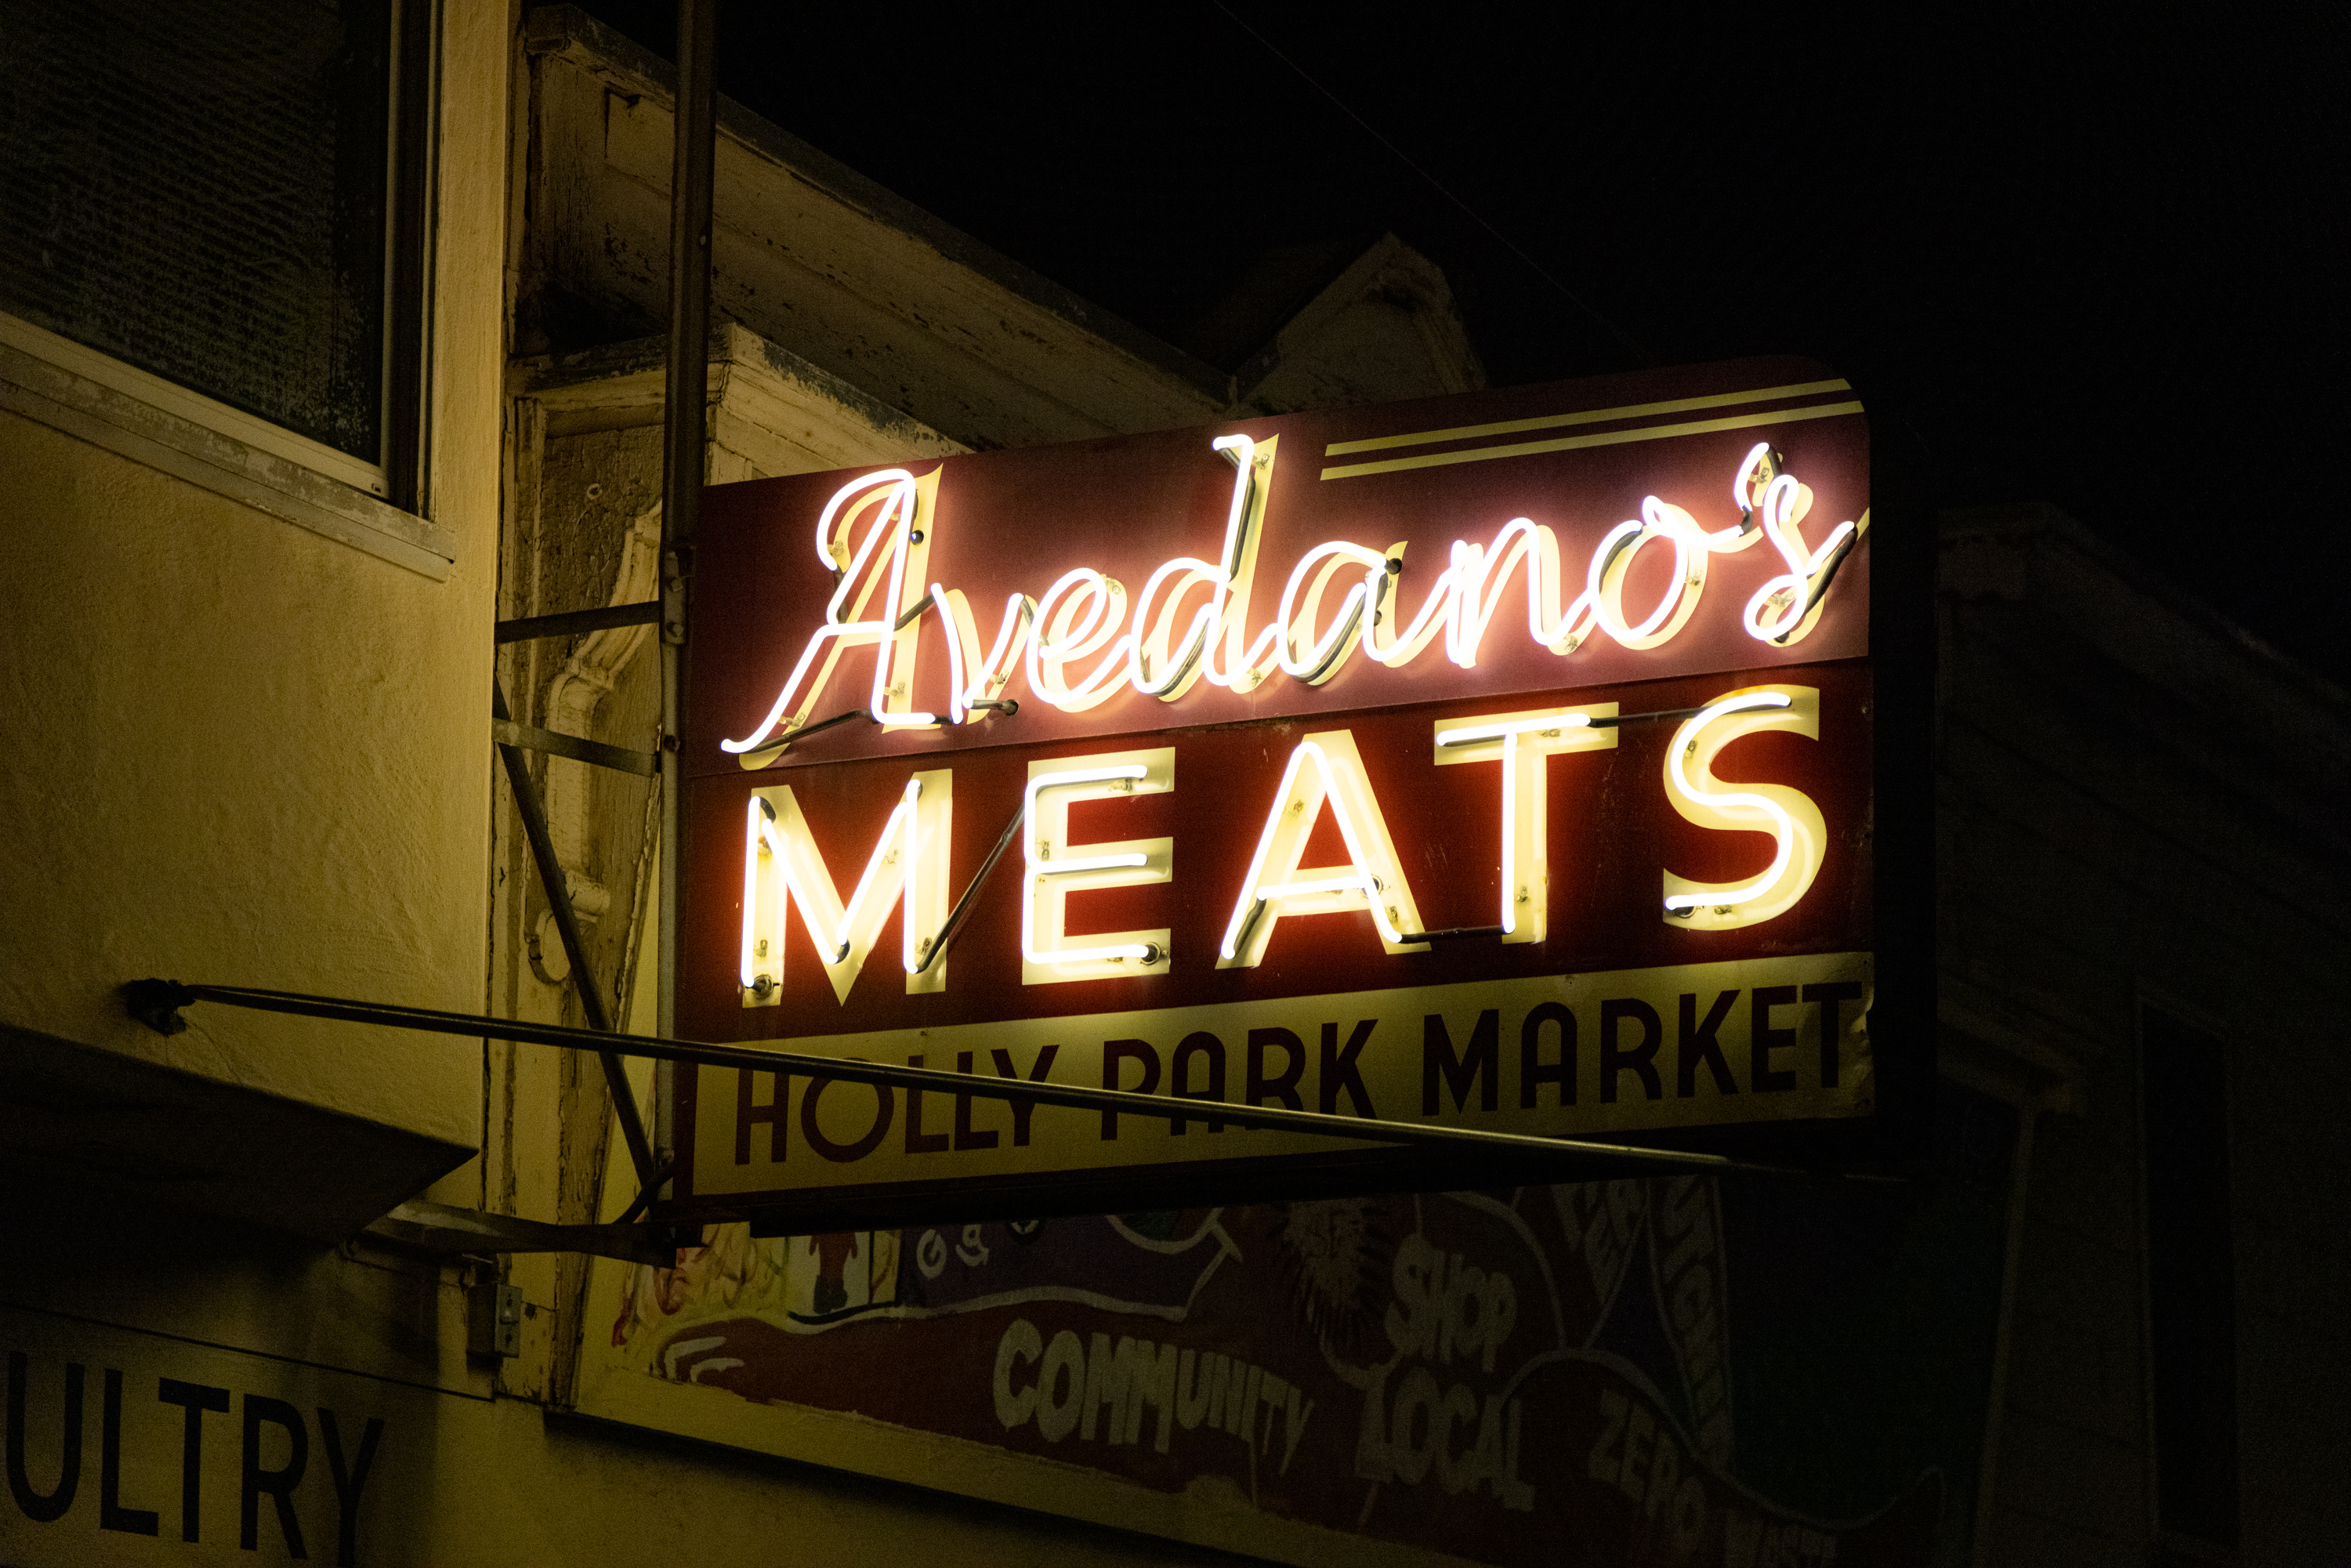 A neon sign at night that reads &quot;Avedano's MEATS&quot;